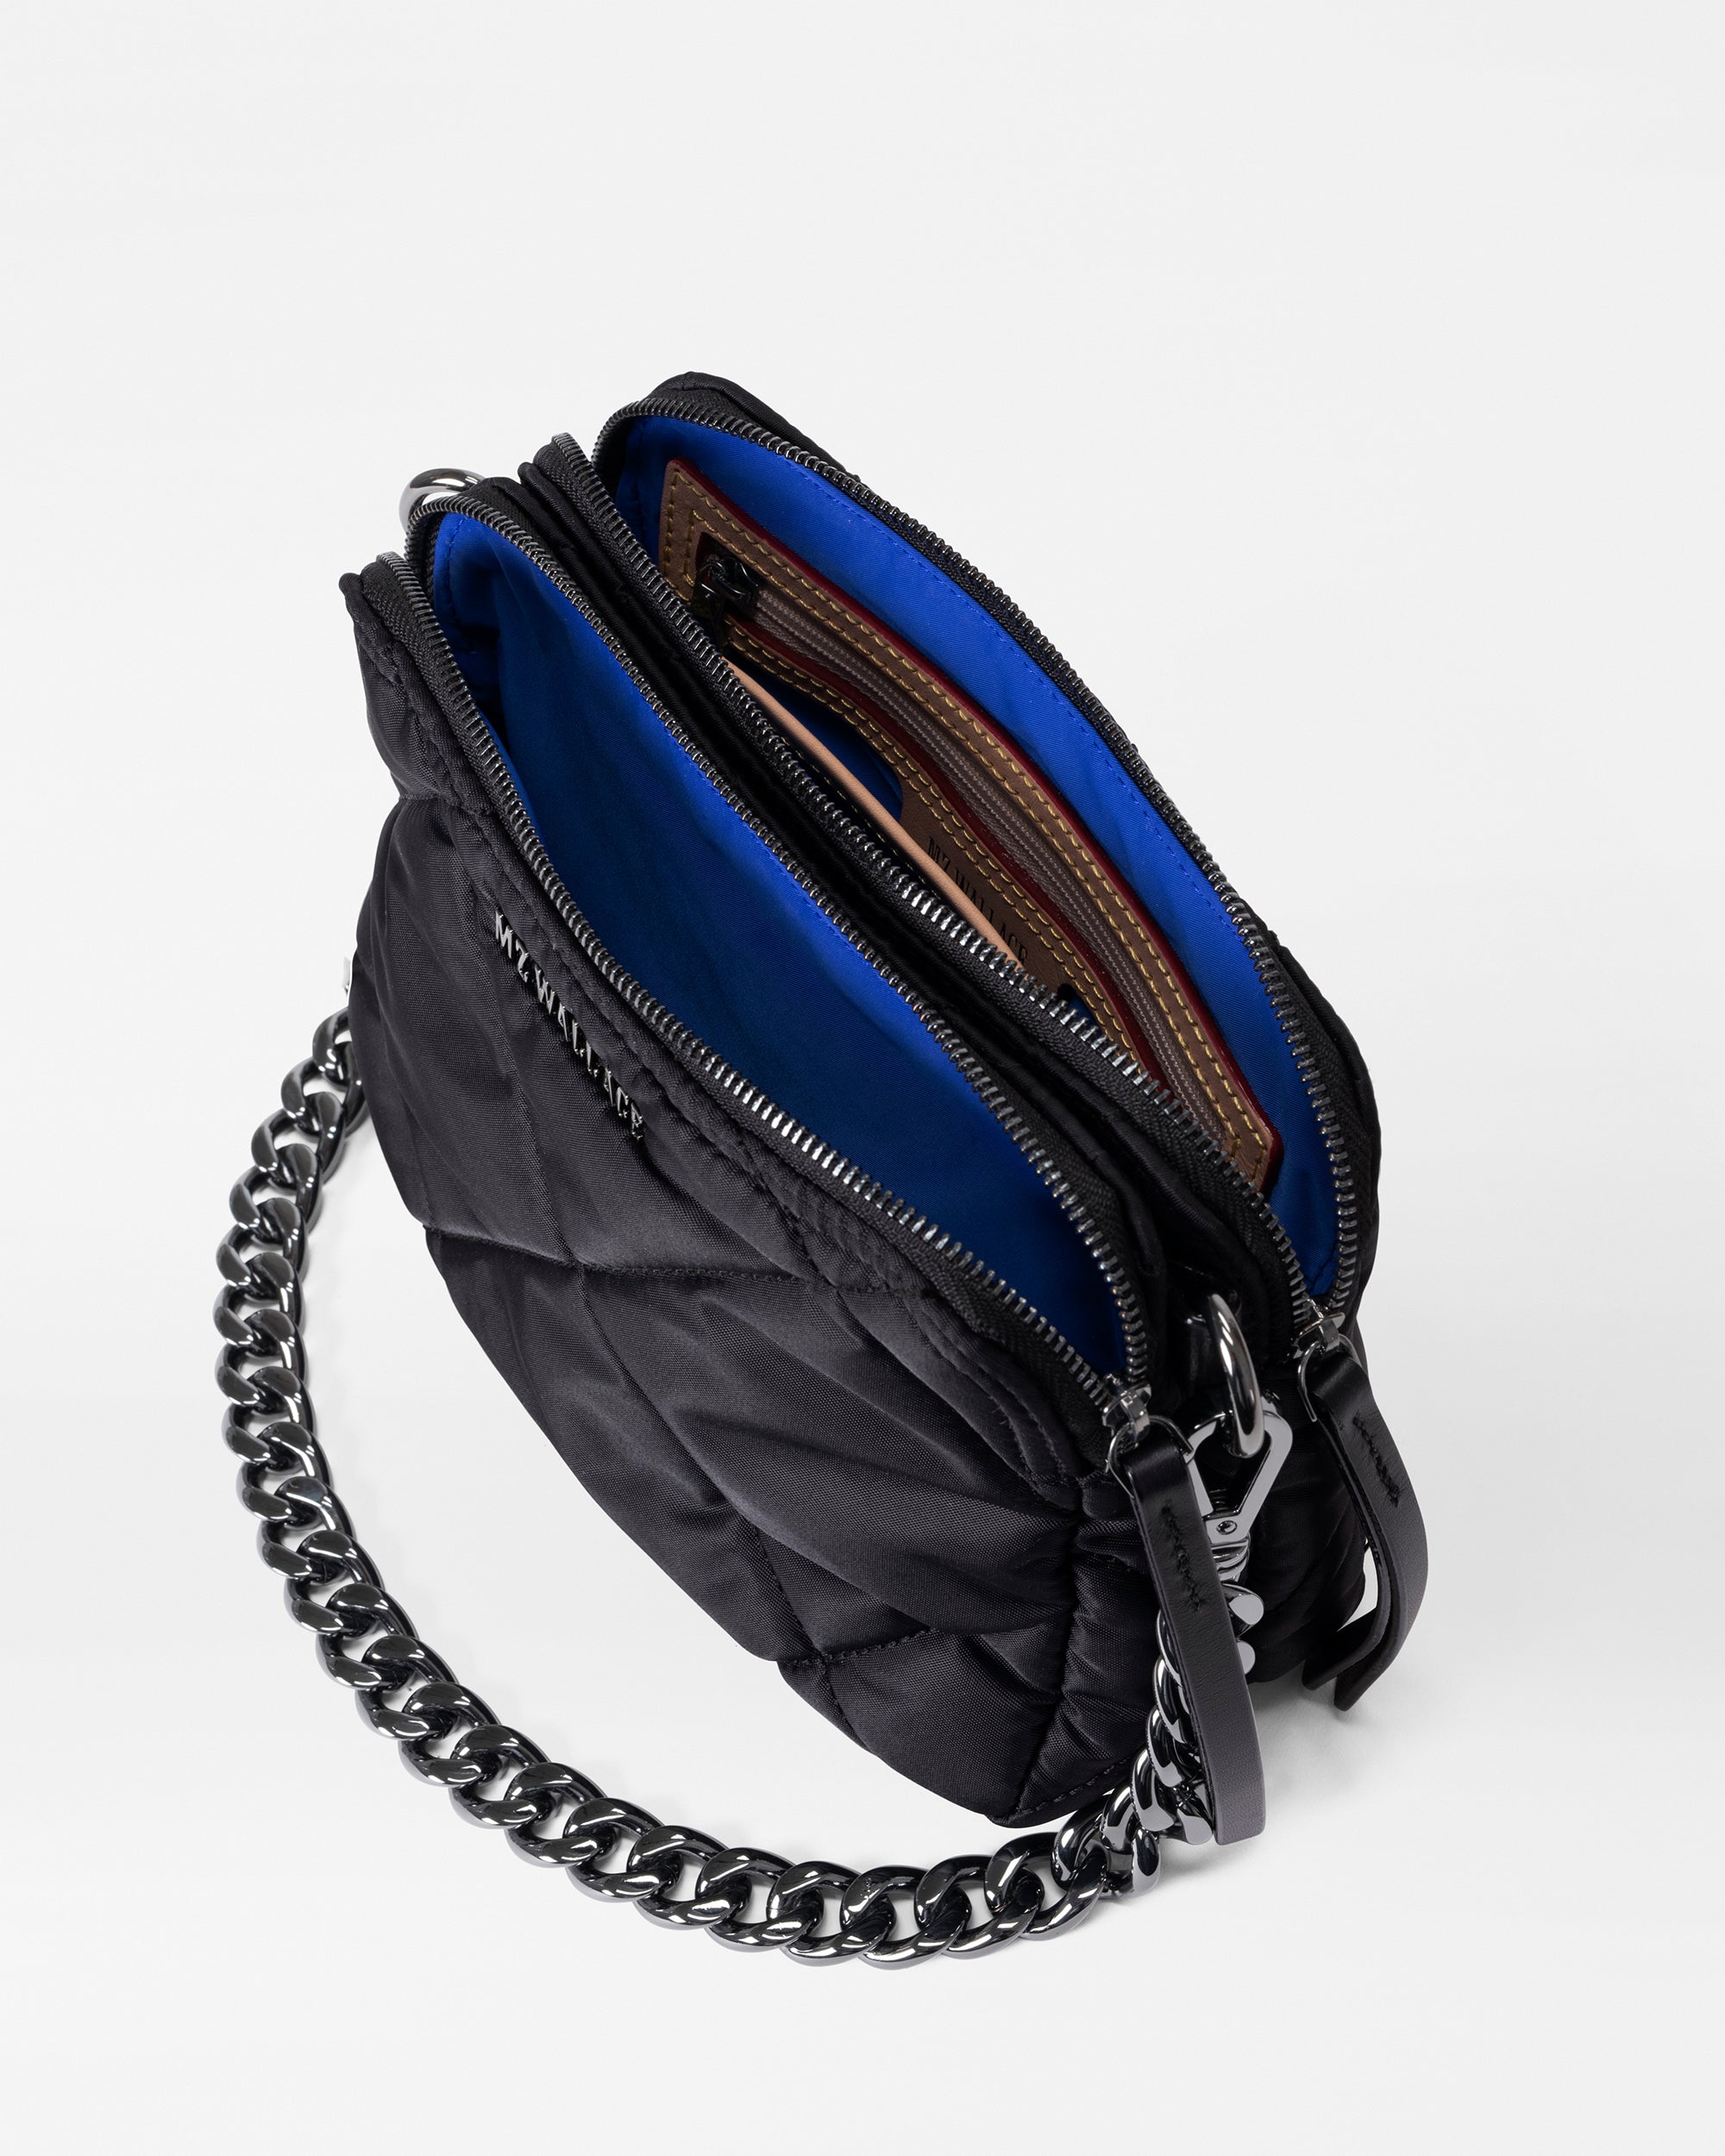 MZ Wallace Bowery Quilted Nylon Crossbody Bag